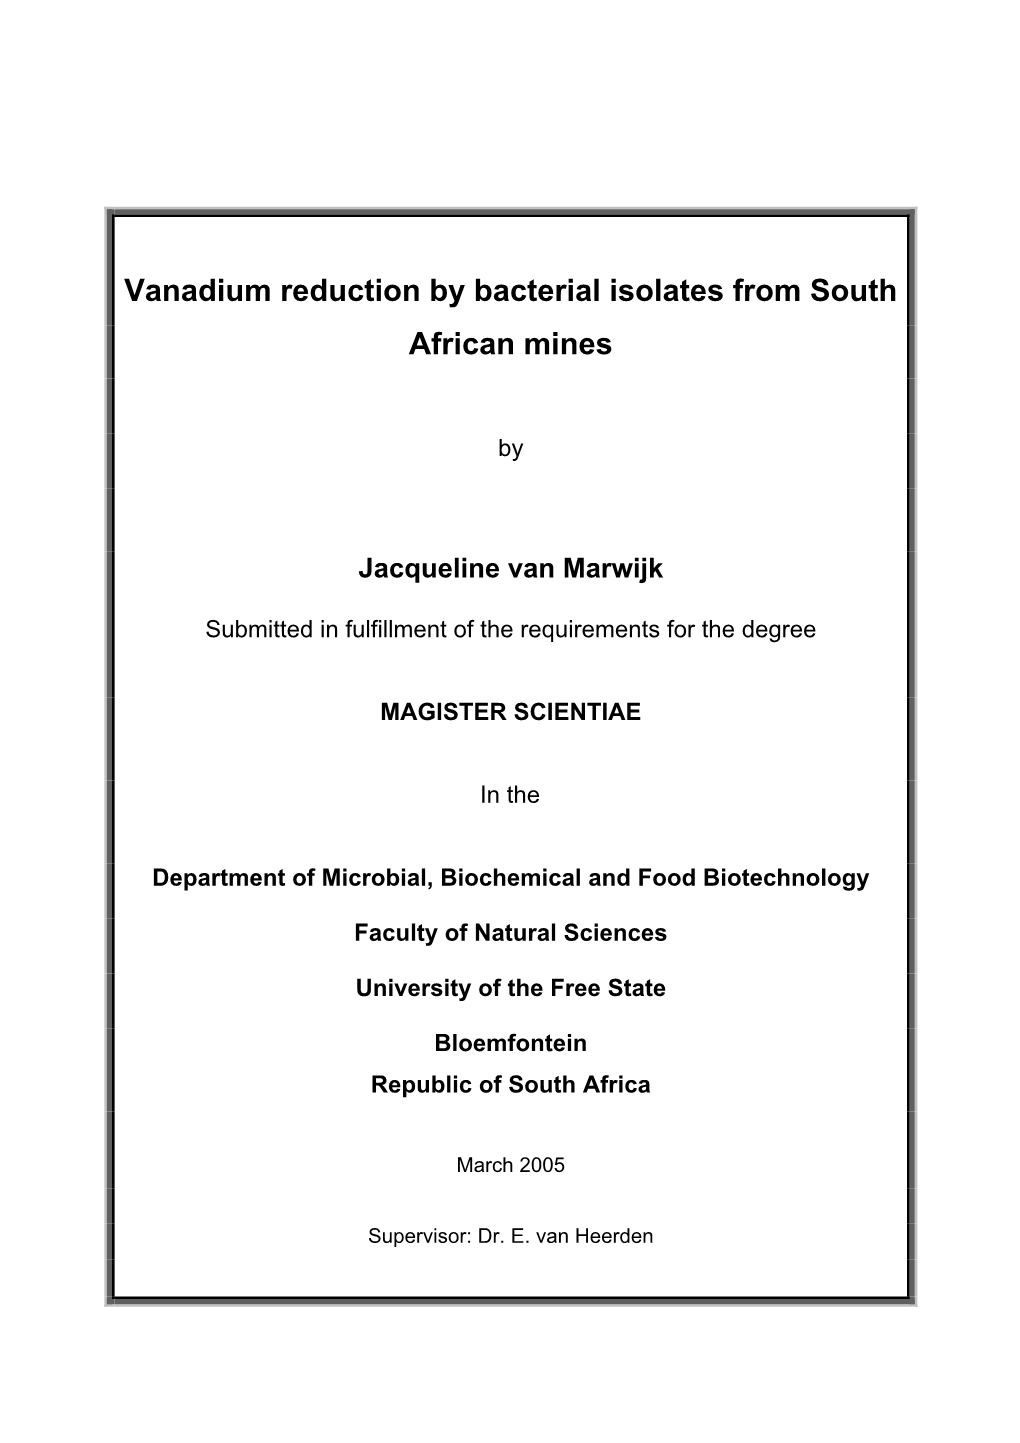 Vanadium Reduction by Bacterial Isolates from South African Mines